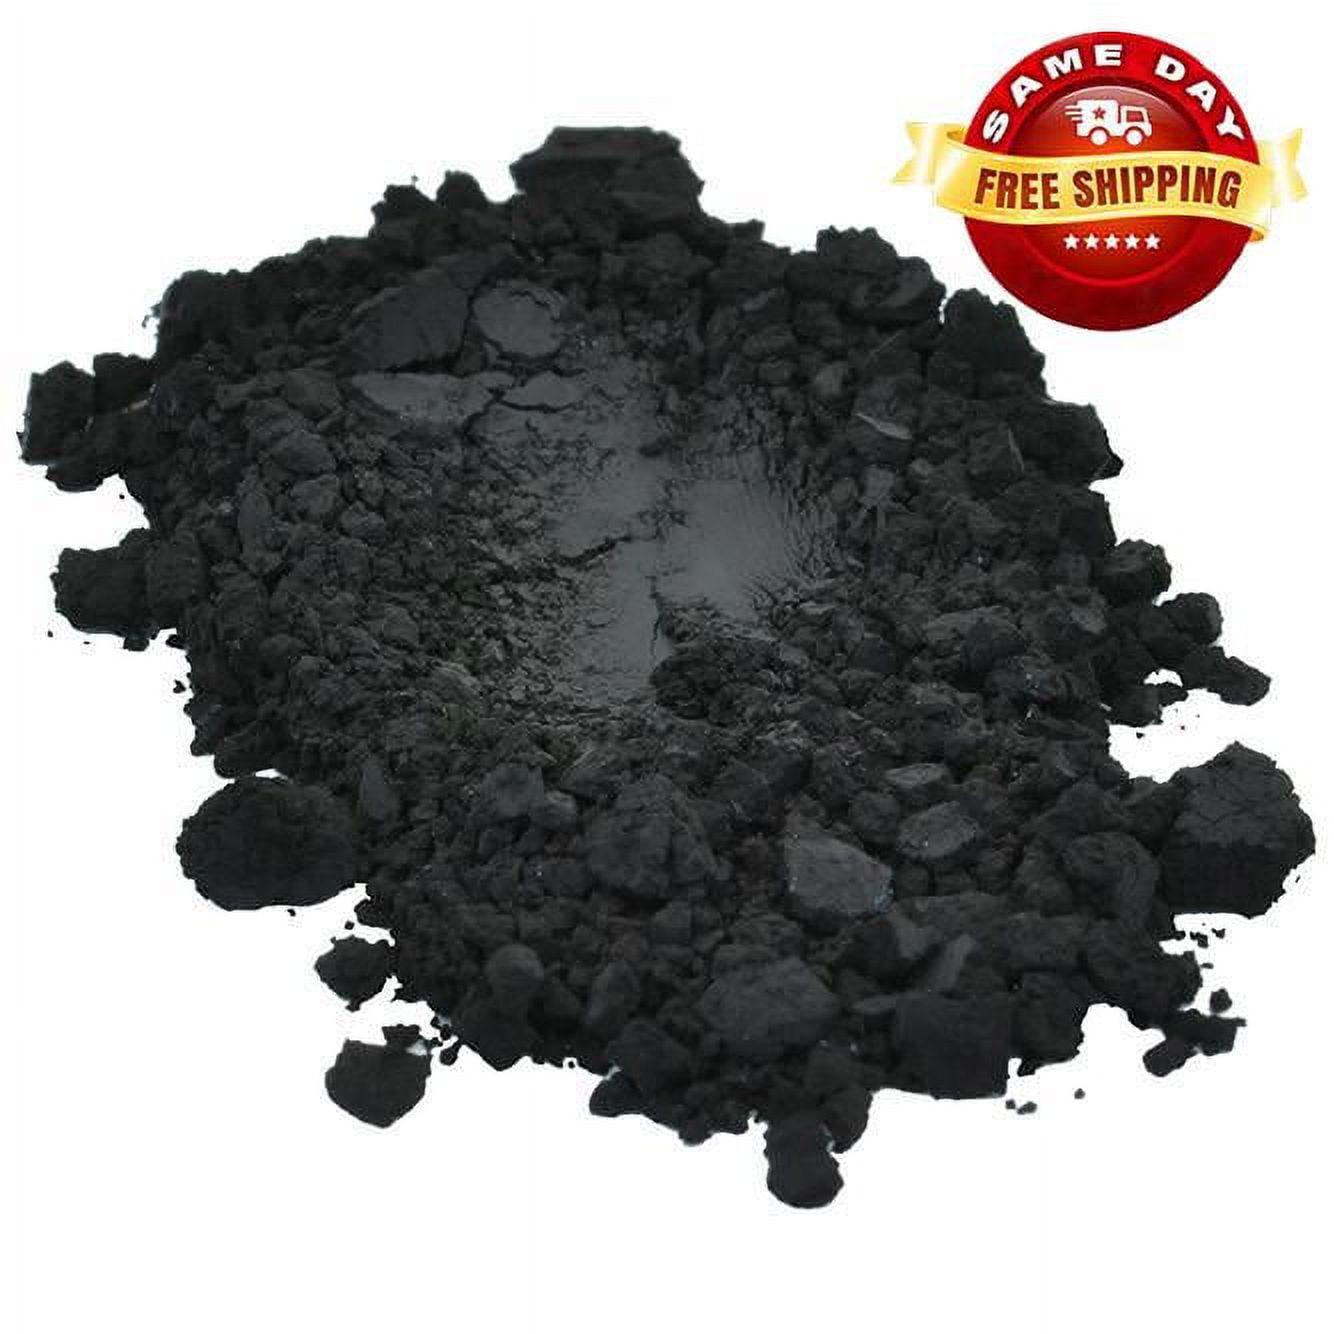 Buy Online Black Iron Oxide at Lowest Costs- MakeYouOwn